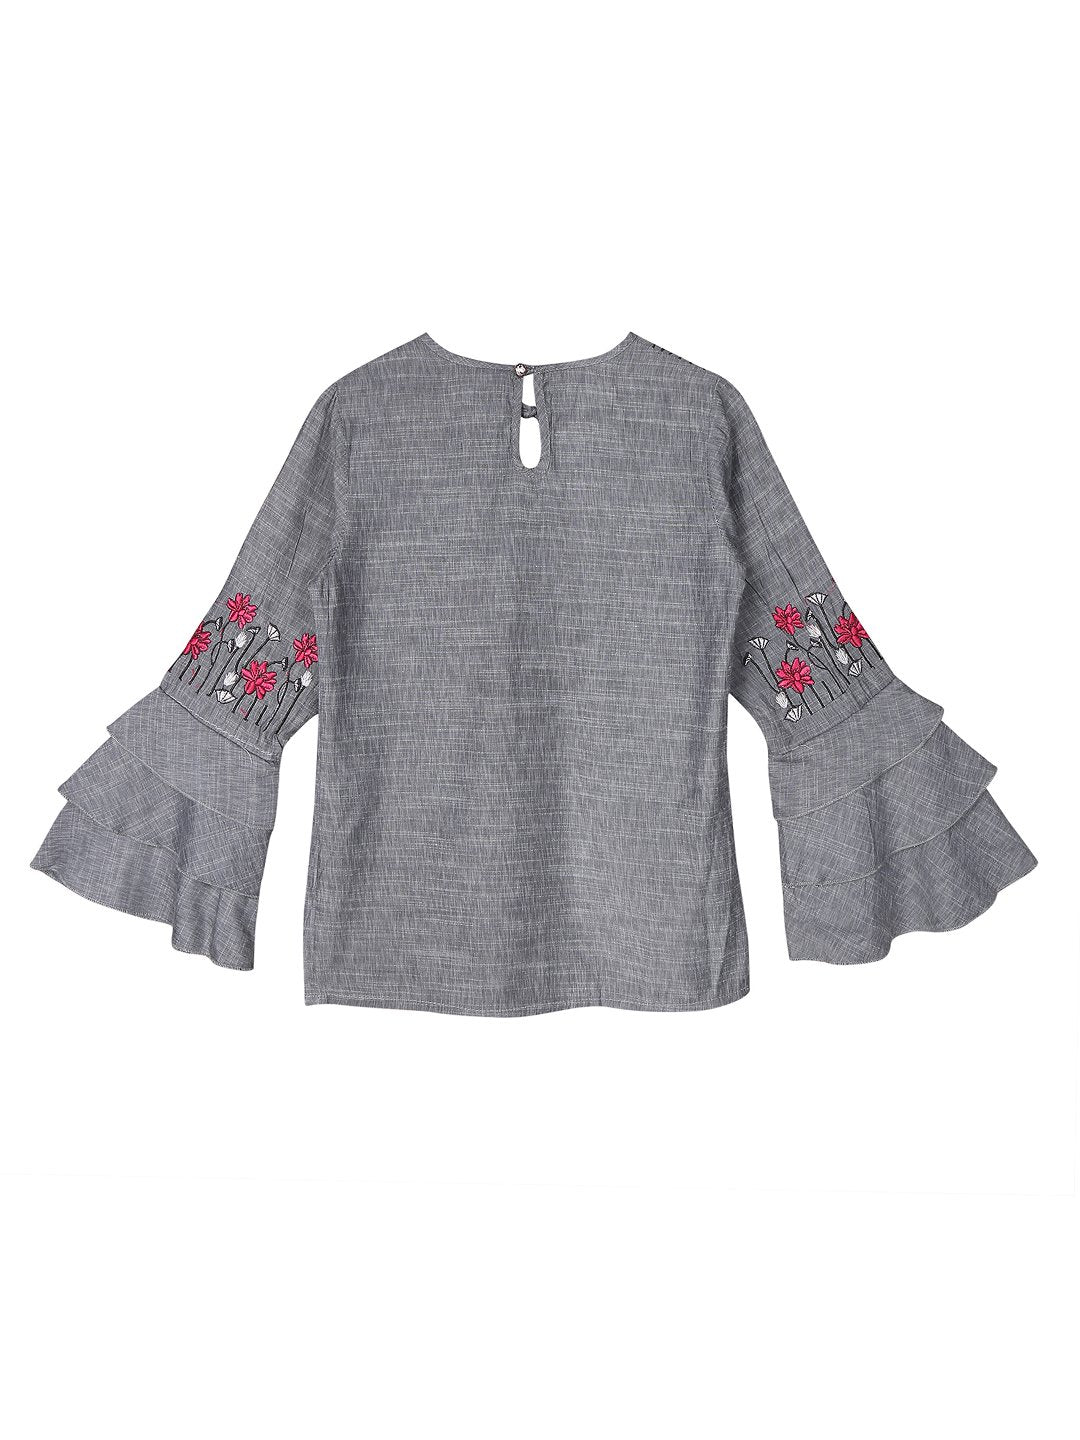 Ishin Girls Cotton Polyester Grey Embroidered Top